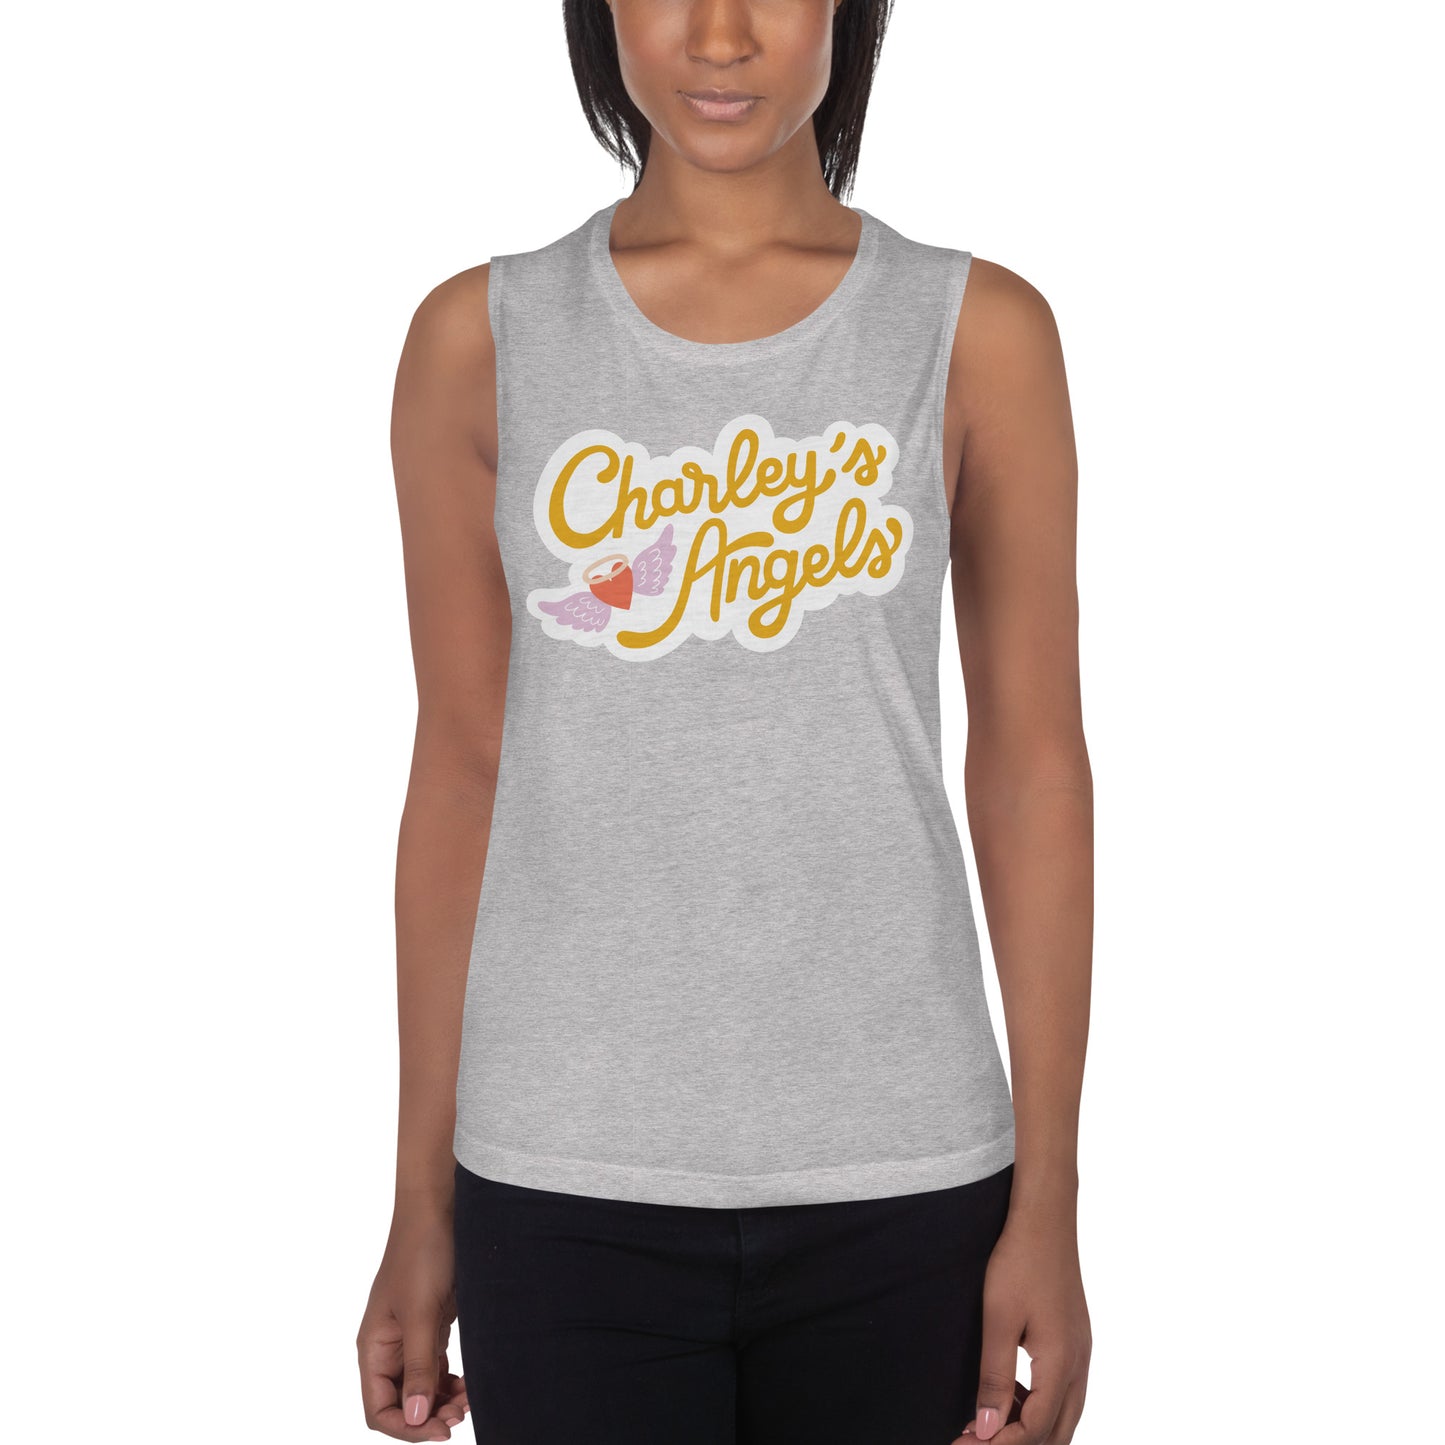 Charley's Angels — Muscle Tank